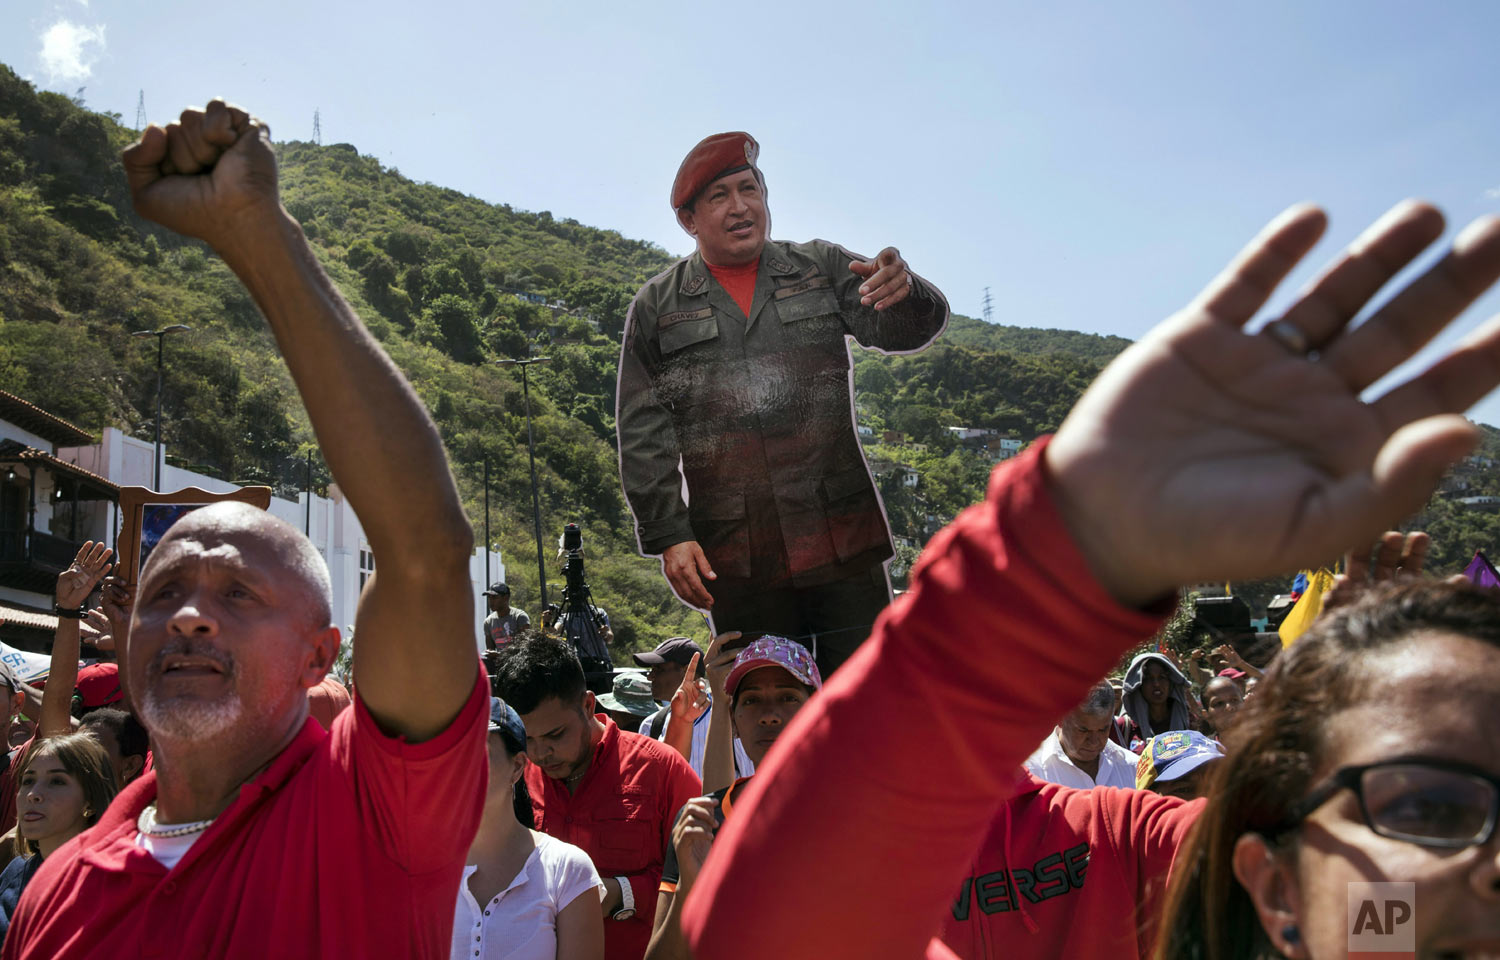  Government supporters hold a life-size image of Venezuela's late President Hugo Chavez during a rally in La Guaira, Venezuela, Friday, Jan. 25, 2019. Venezuelan President Nicolas Maduro, Chavez's protege, says he's willing to engage in talks with th